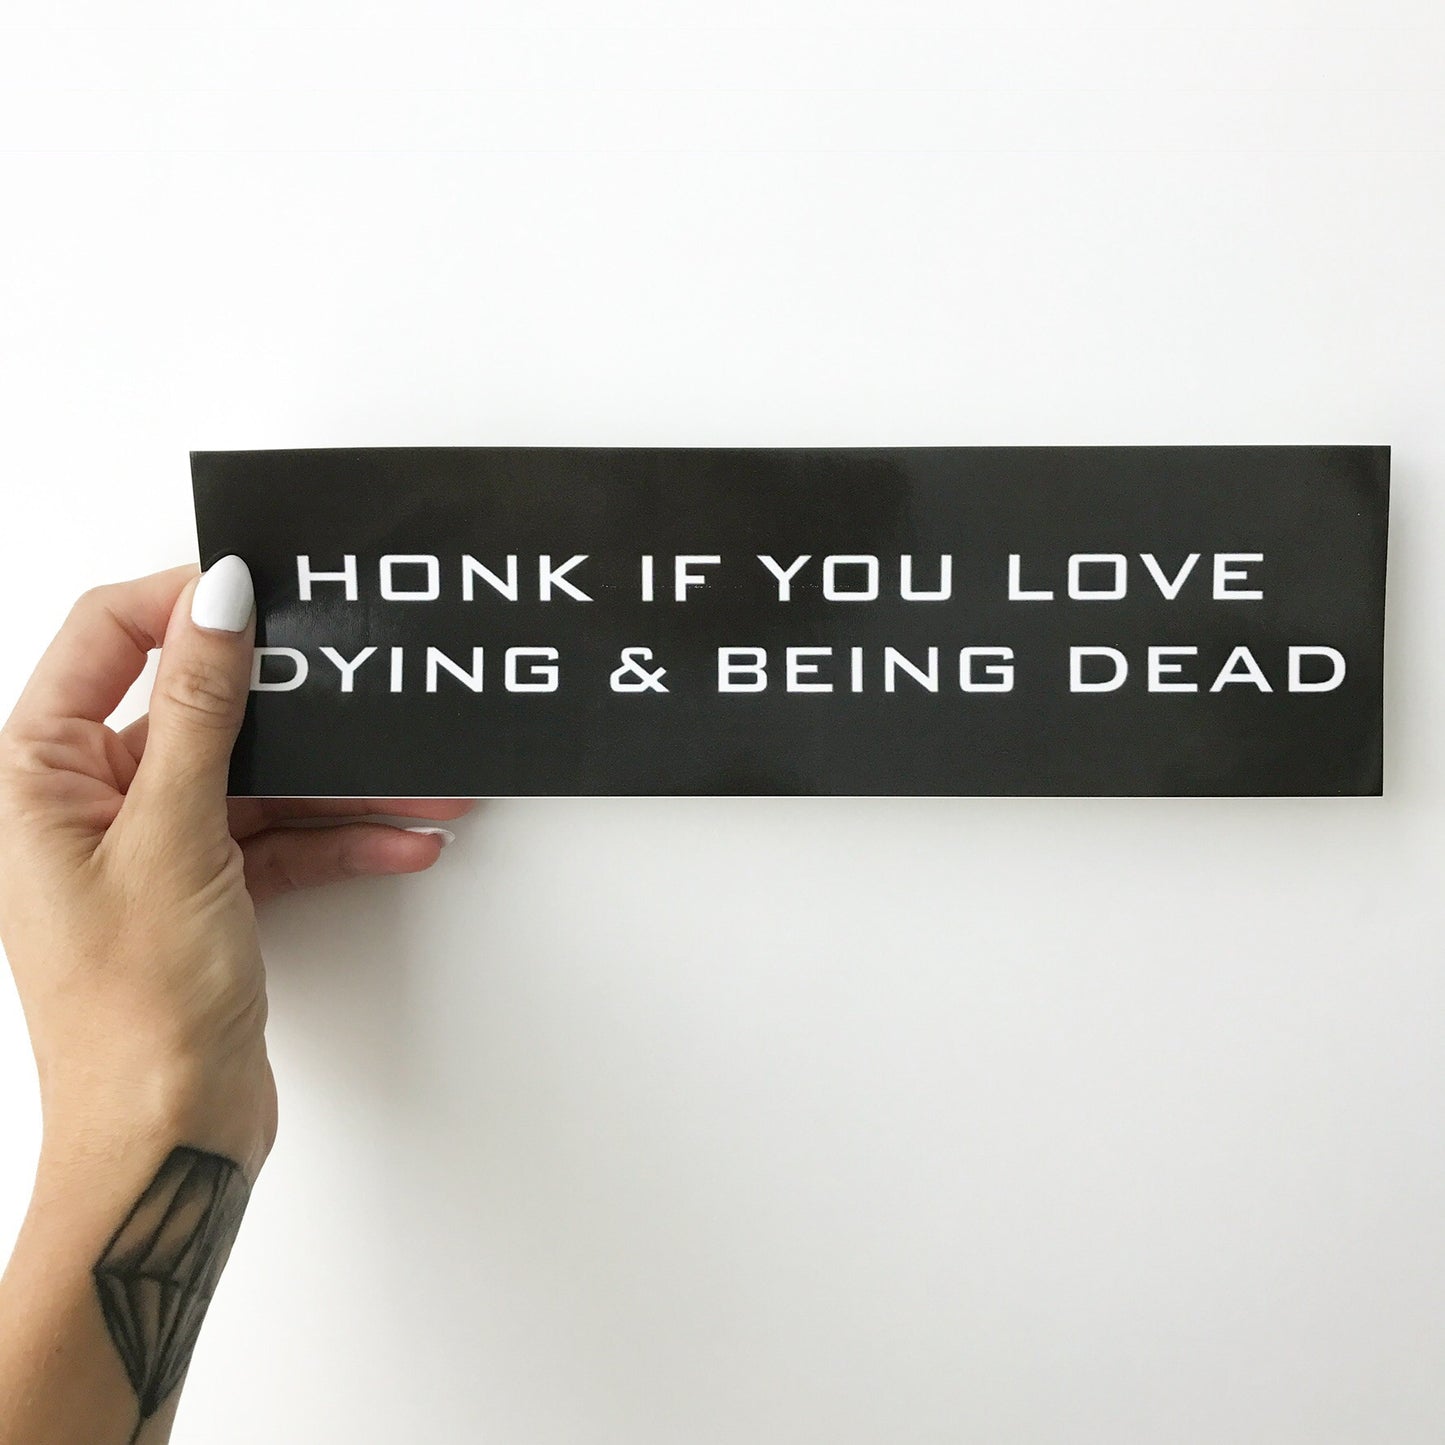 Honk If You Love Dying & Being Dead Bumper Sticker